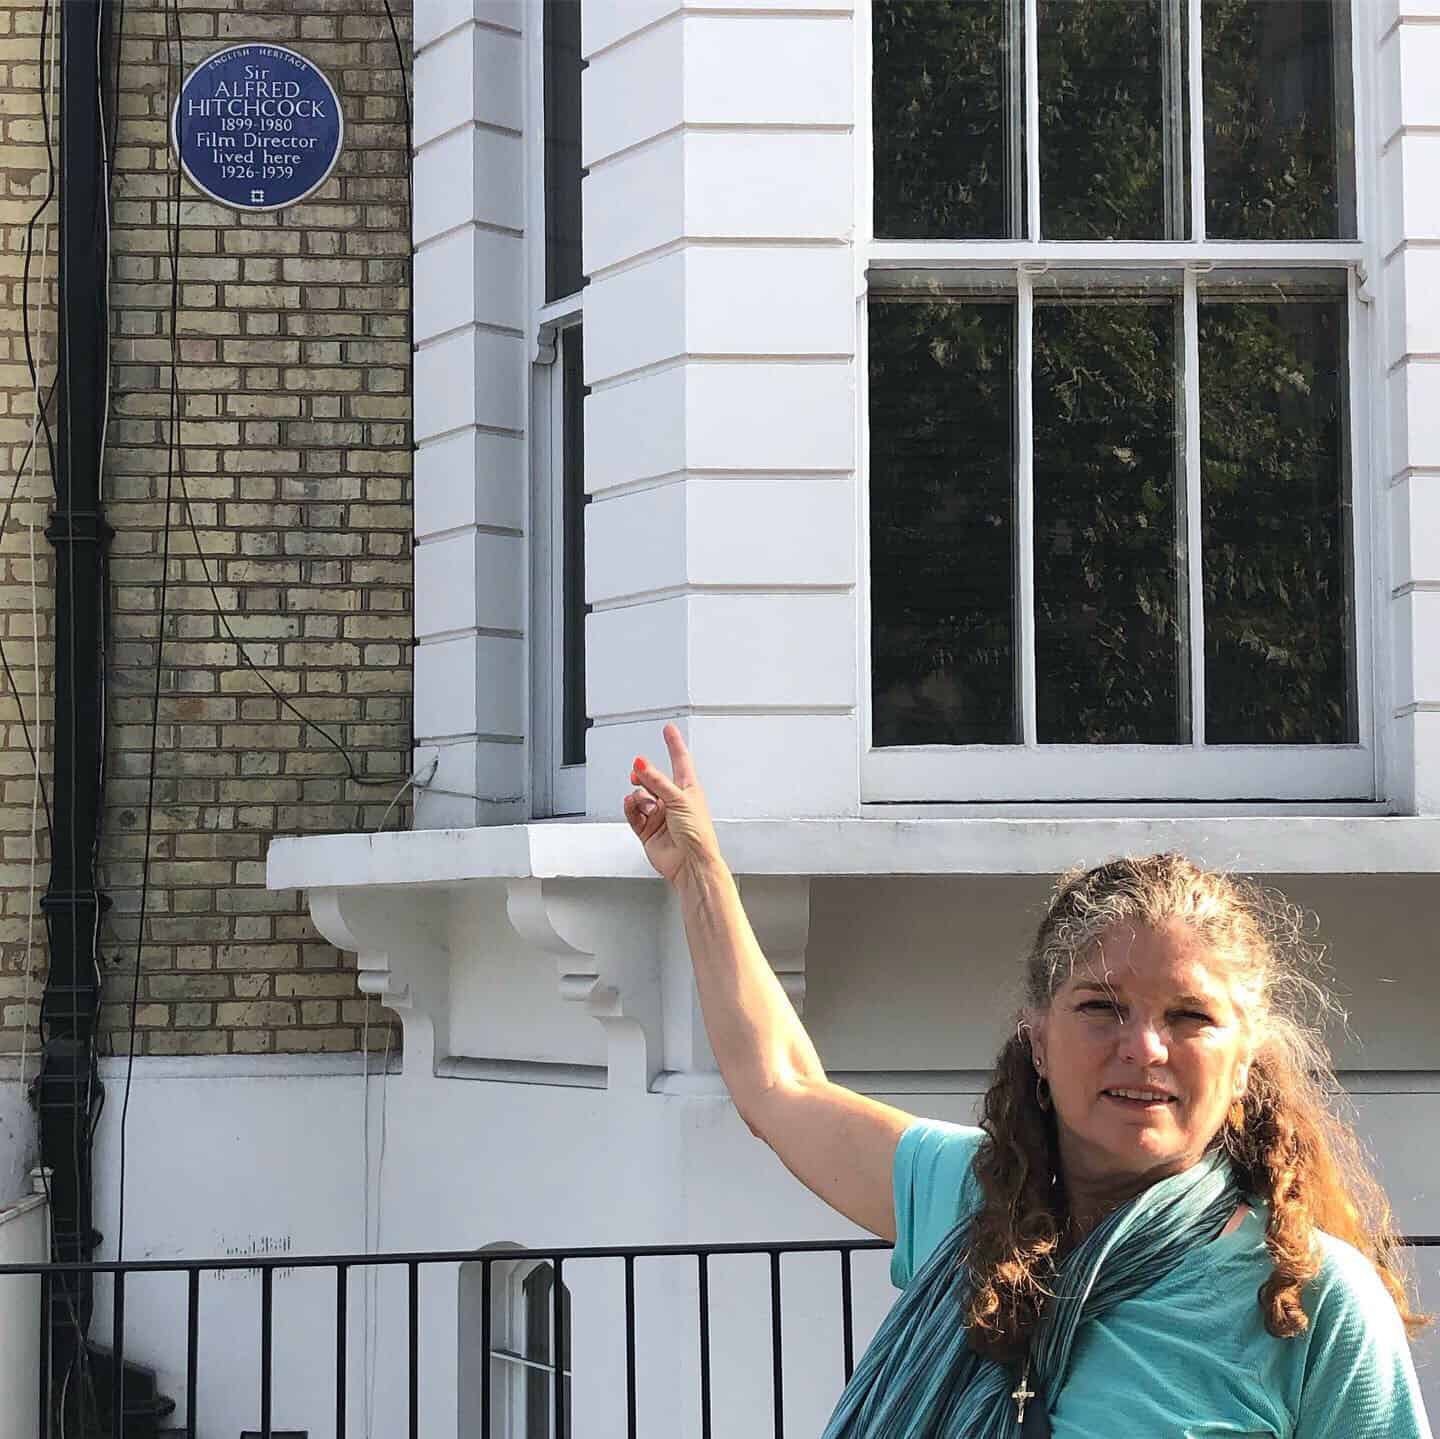 Standing outside the former residence of Sir Alfred Hitchcock in London